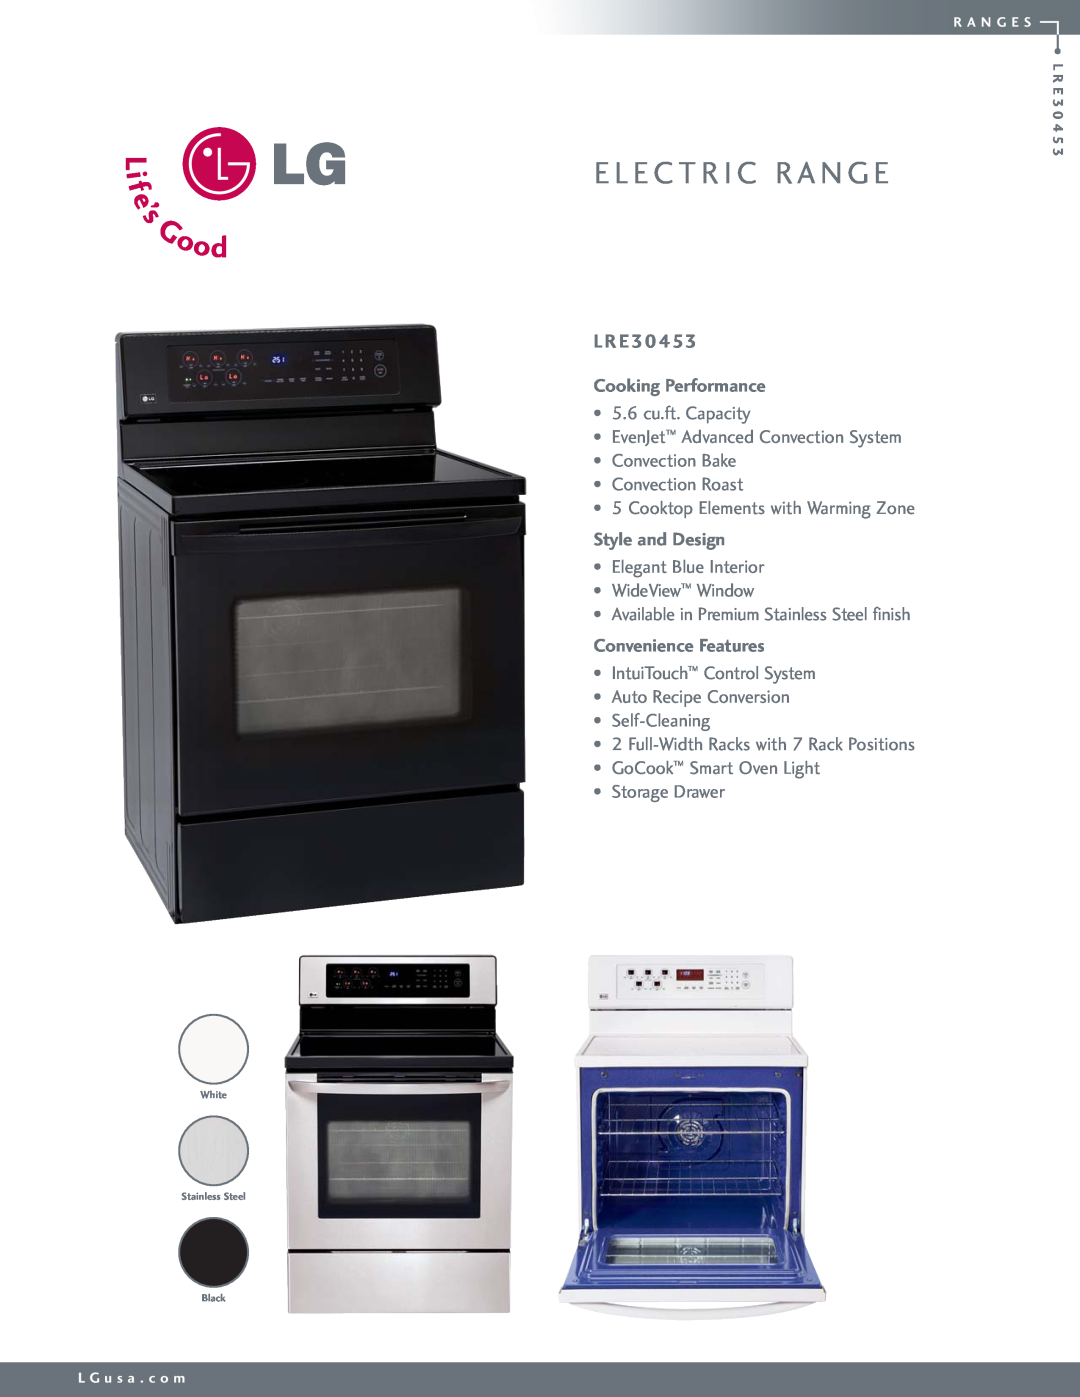 LG Electronics LRE30453 manual L R E, E L E C T R I C R A N G E, Cooking Performance, Style and Design 